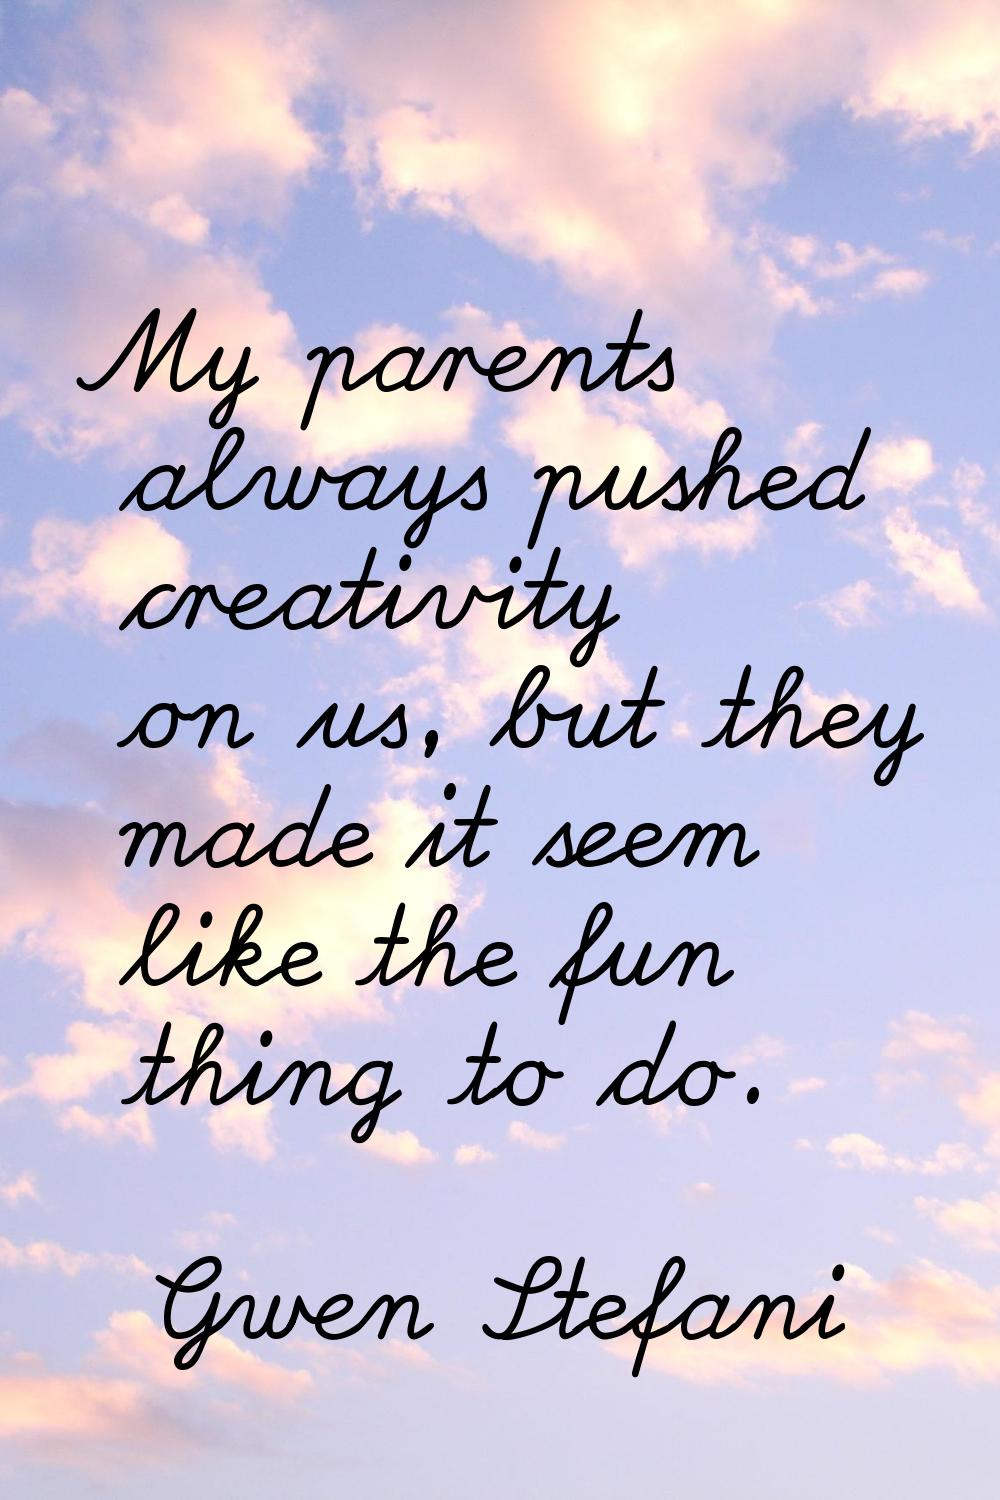 My parents always pushed creativity on us, but they made it seem like the fun thing to do.